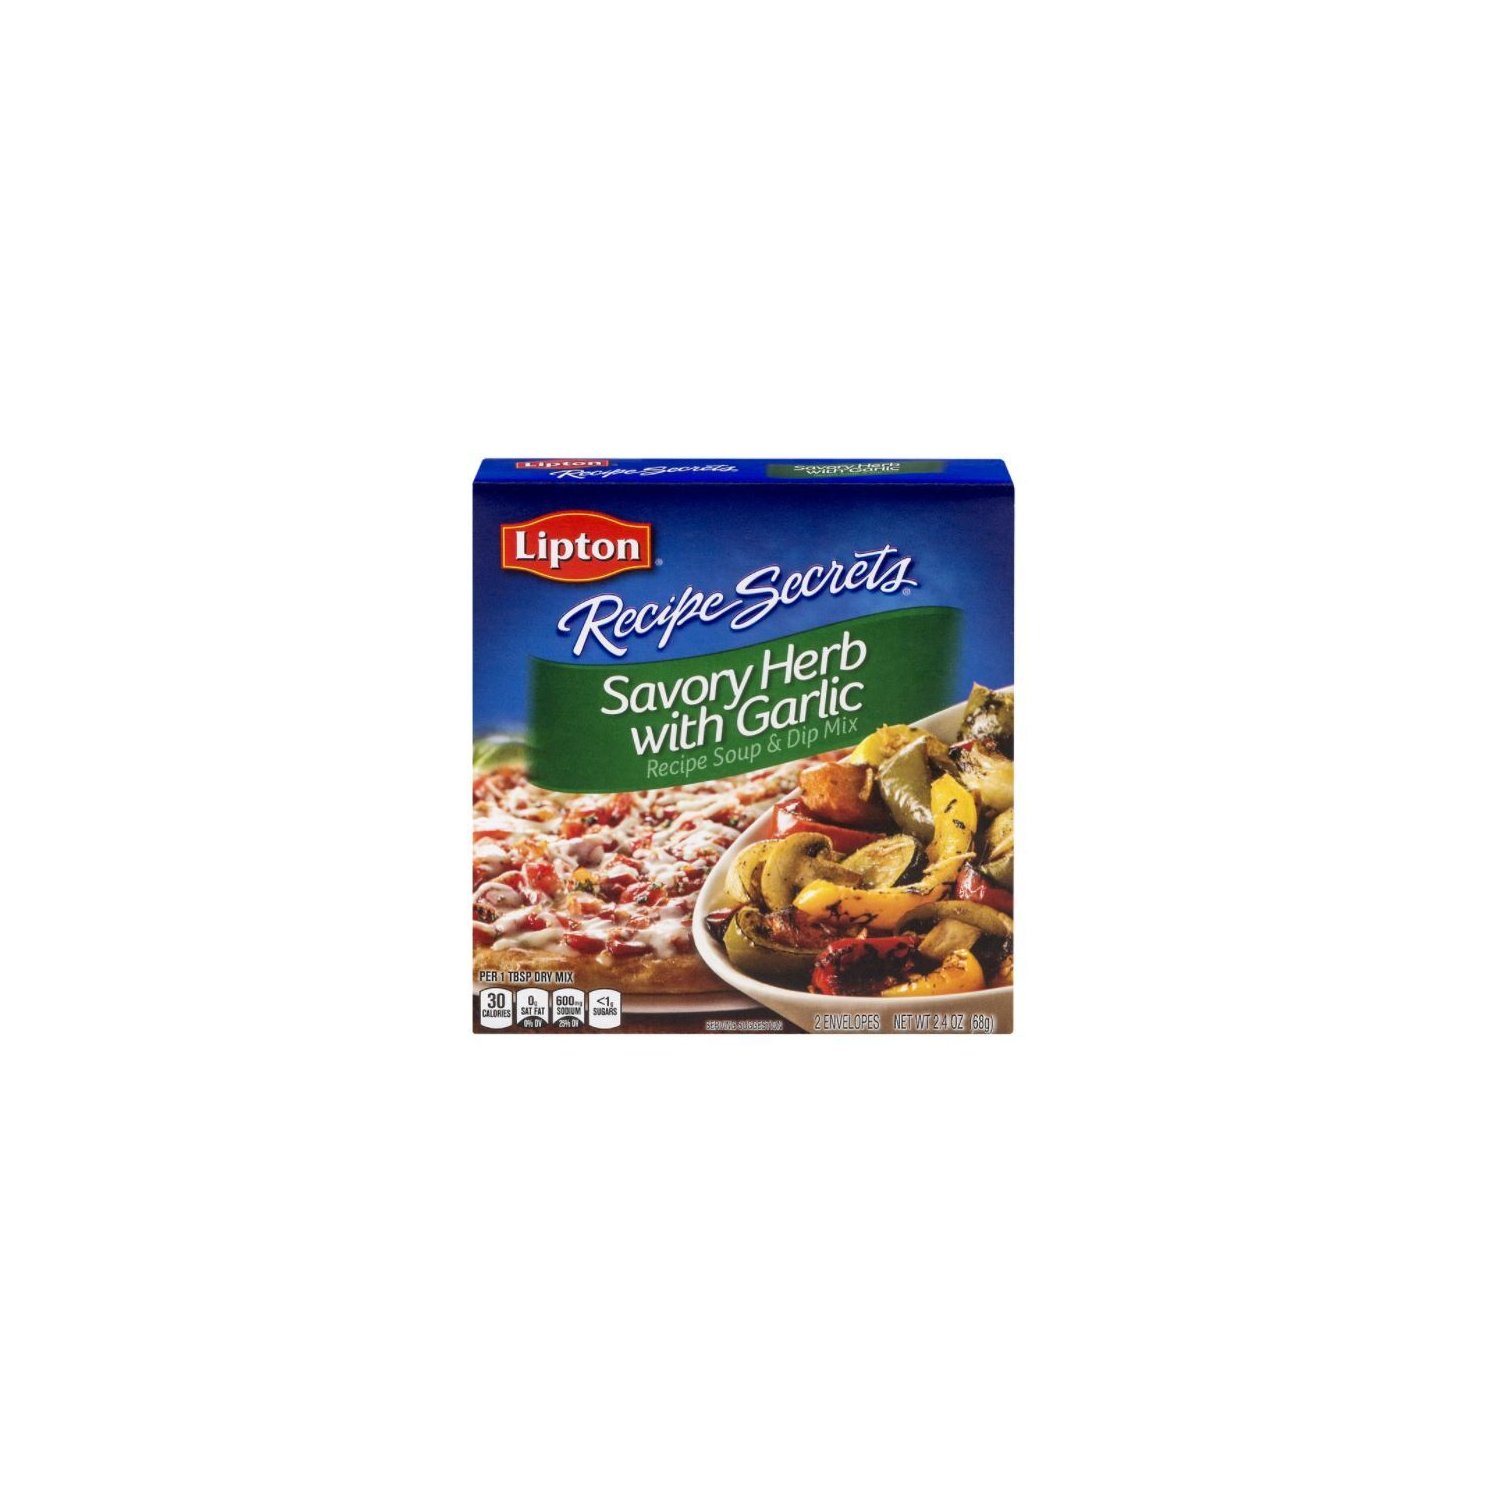 Lipton Recipe Secrets Savory Herb with Garlic Soup and Dip Mix, 2.4 oz, 2  Pack